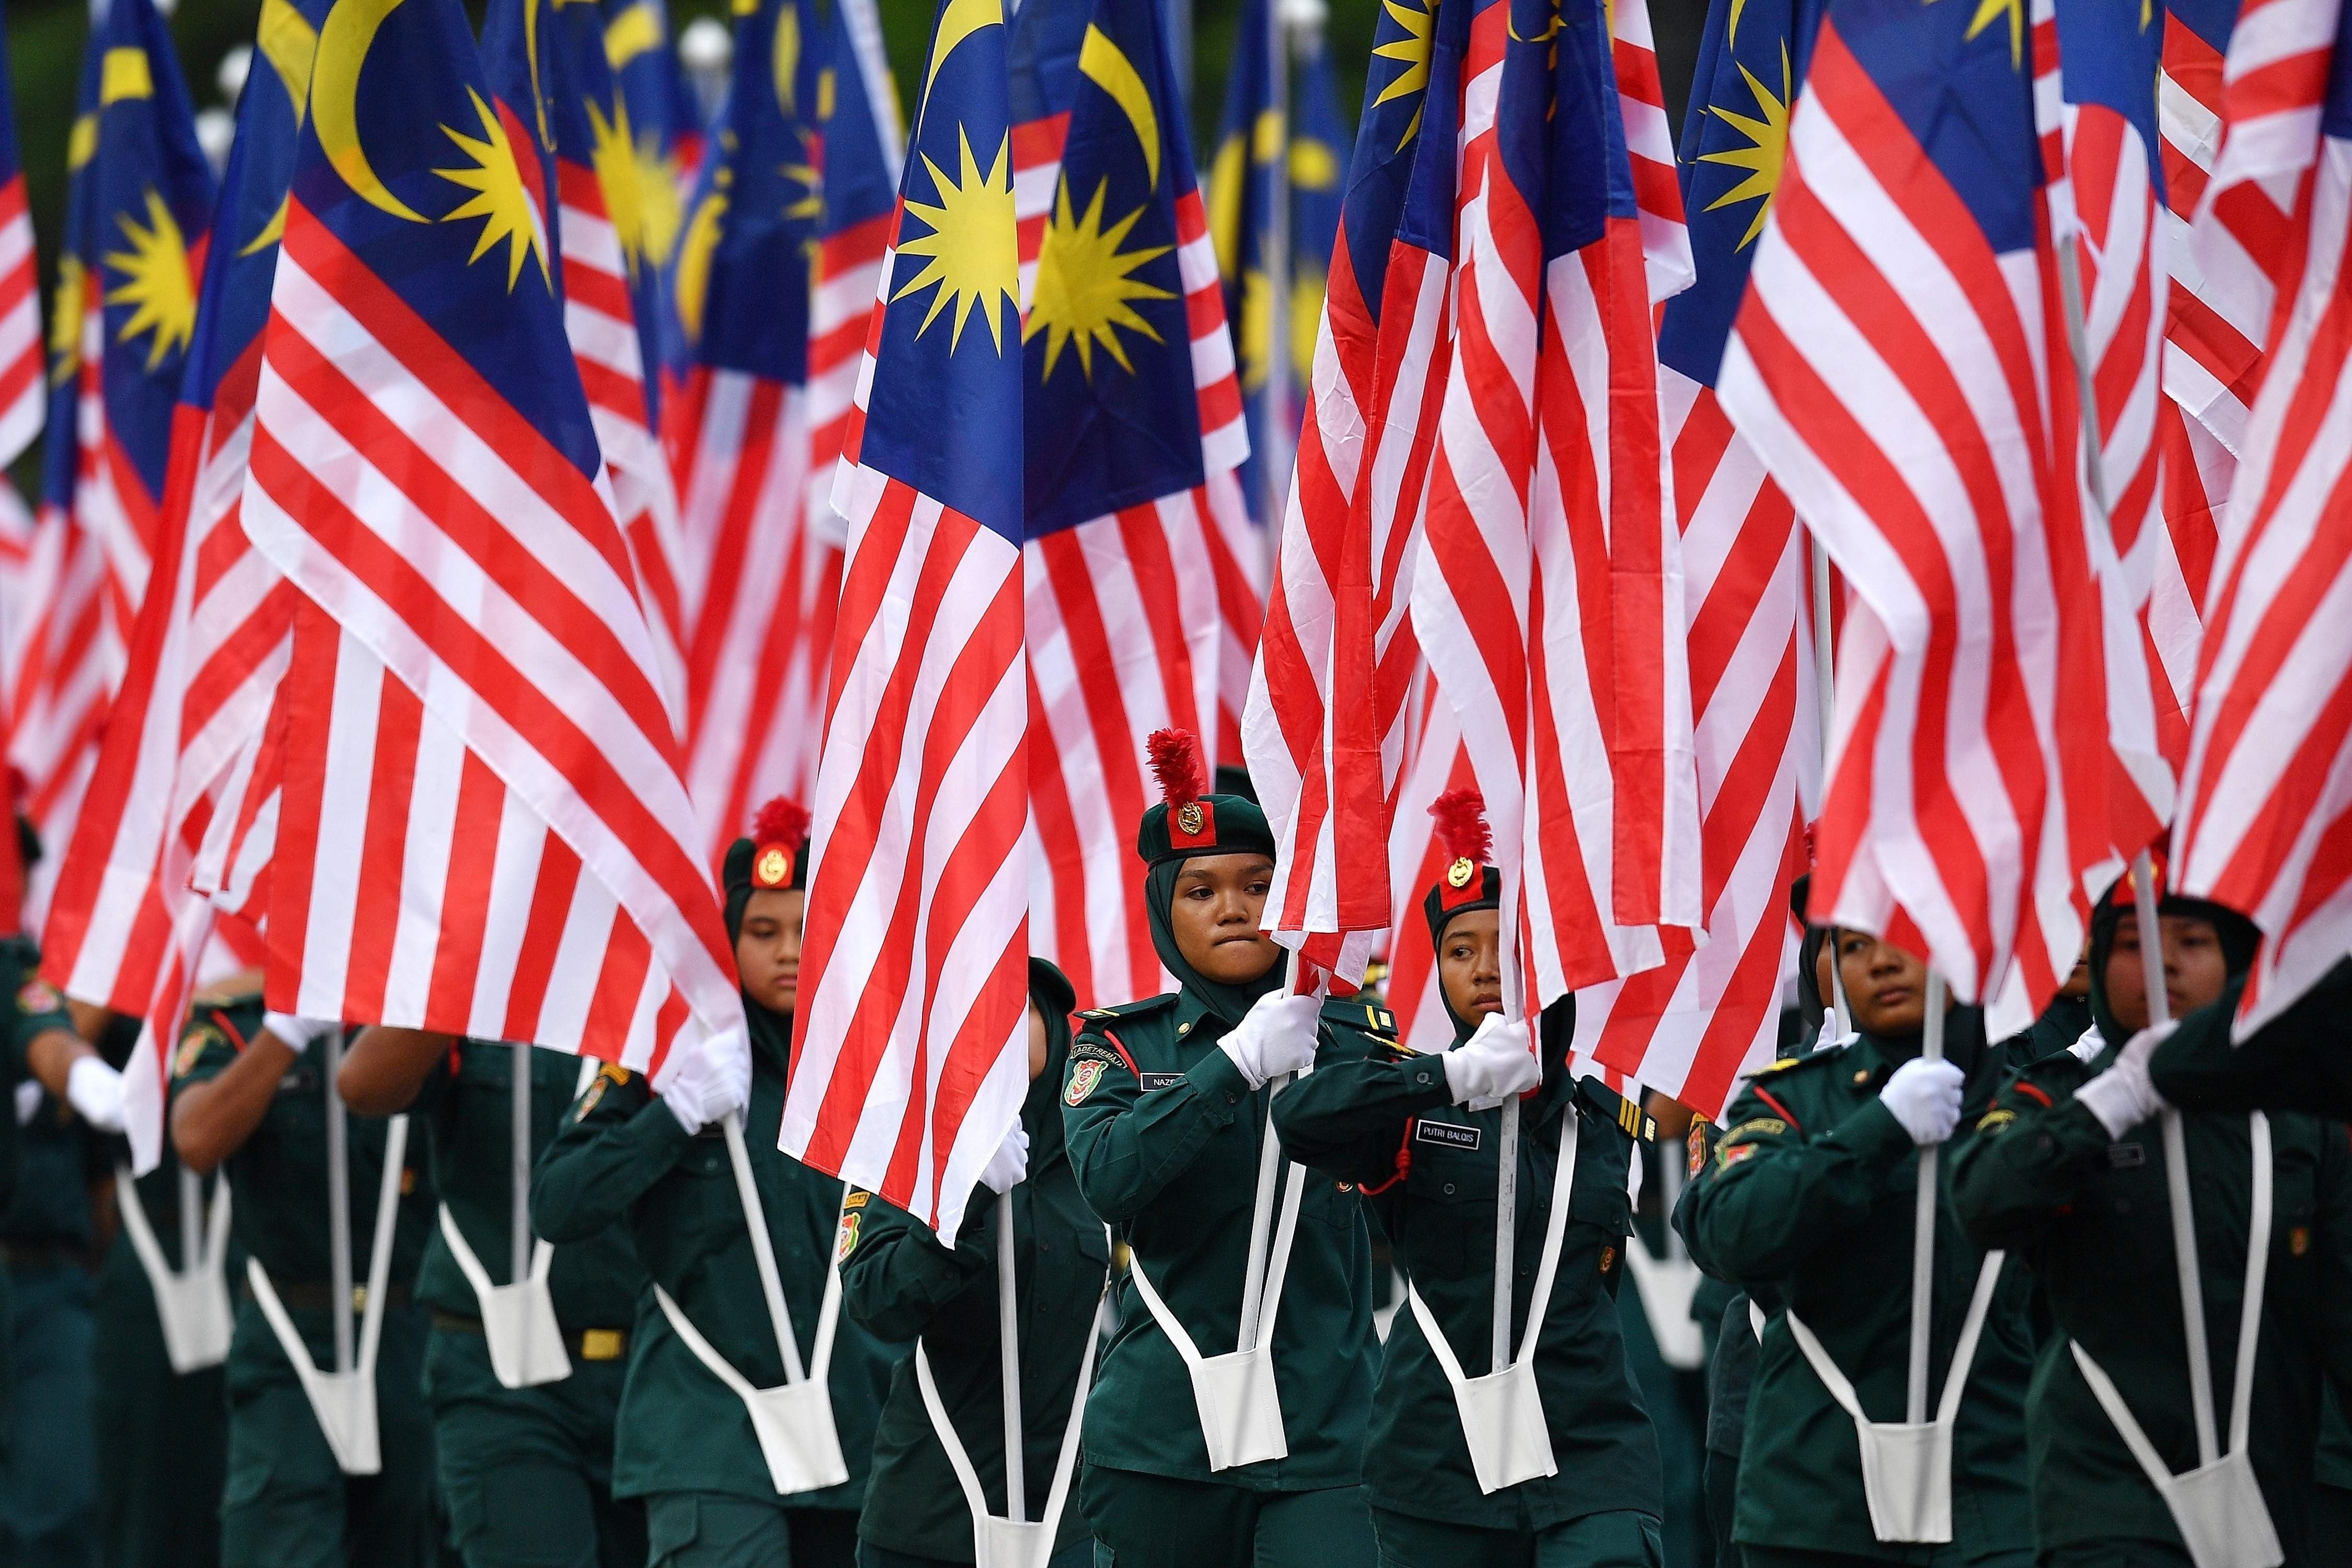 Malaysia Formed as a Diverse Federation